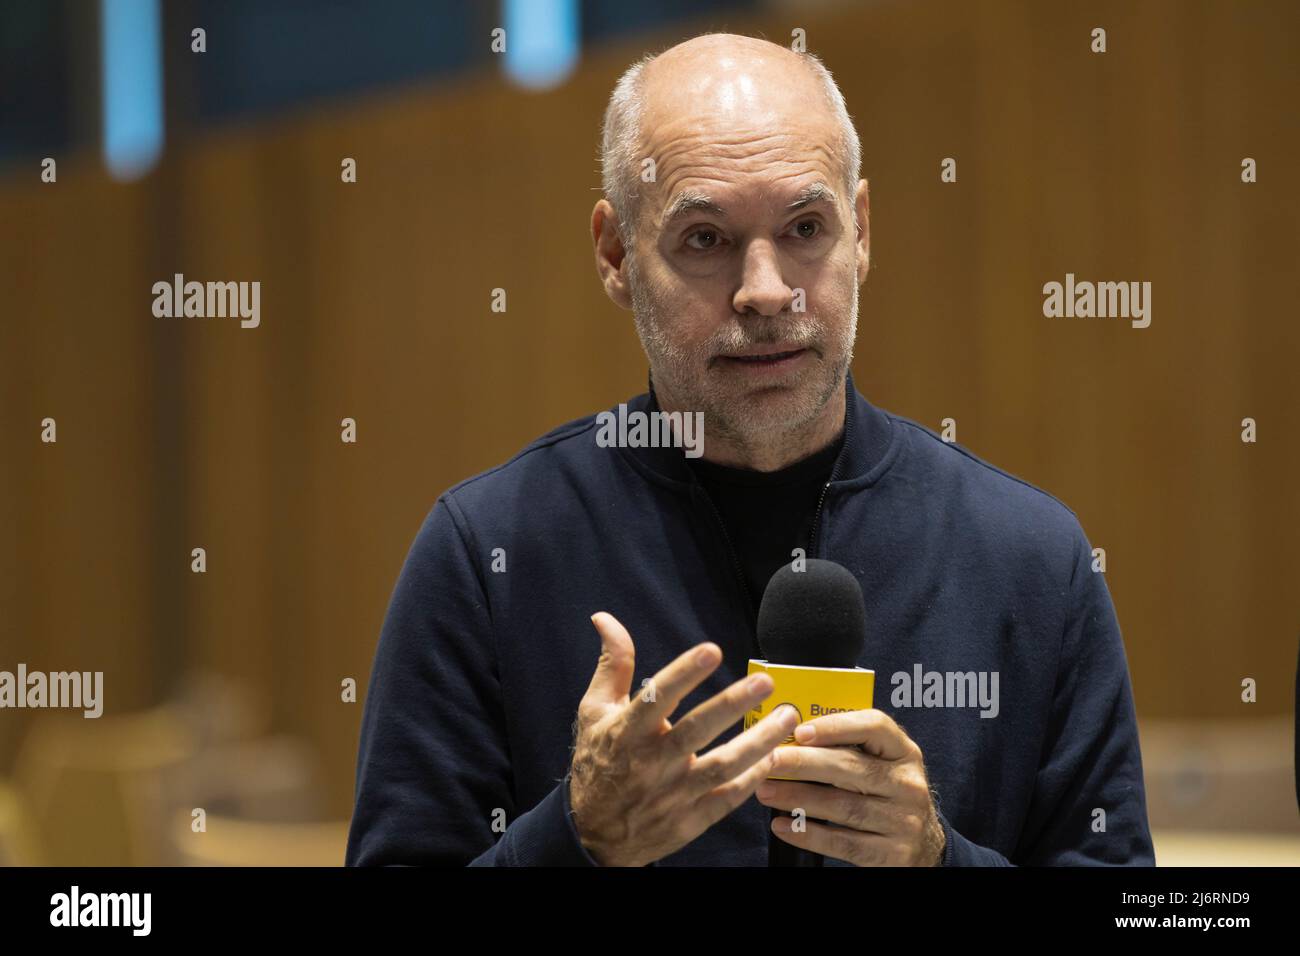 The Head of Government Horacio Rodríguez Larreta gave details about the work practices that began this year in public and private educational establishments for students who are in their last year of high school. The Head of Government answering questions from the media. (Photo by Esteban Osorio/Pacific Press) Stock Photo